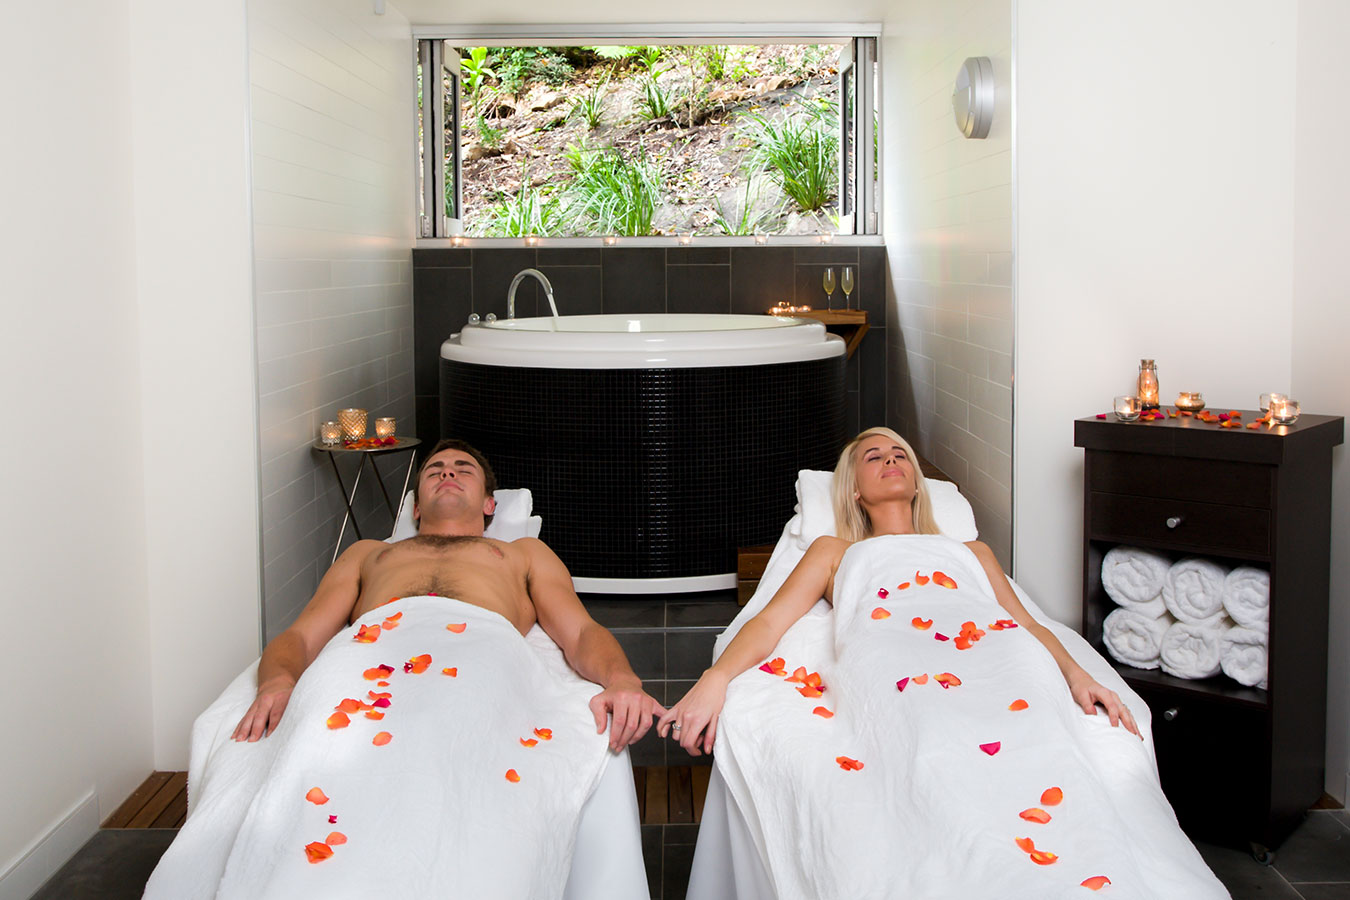 Stephanies Ocean Day Spa located Peppers Noosa Resort and